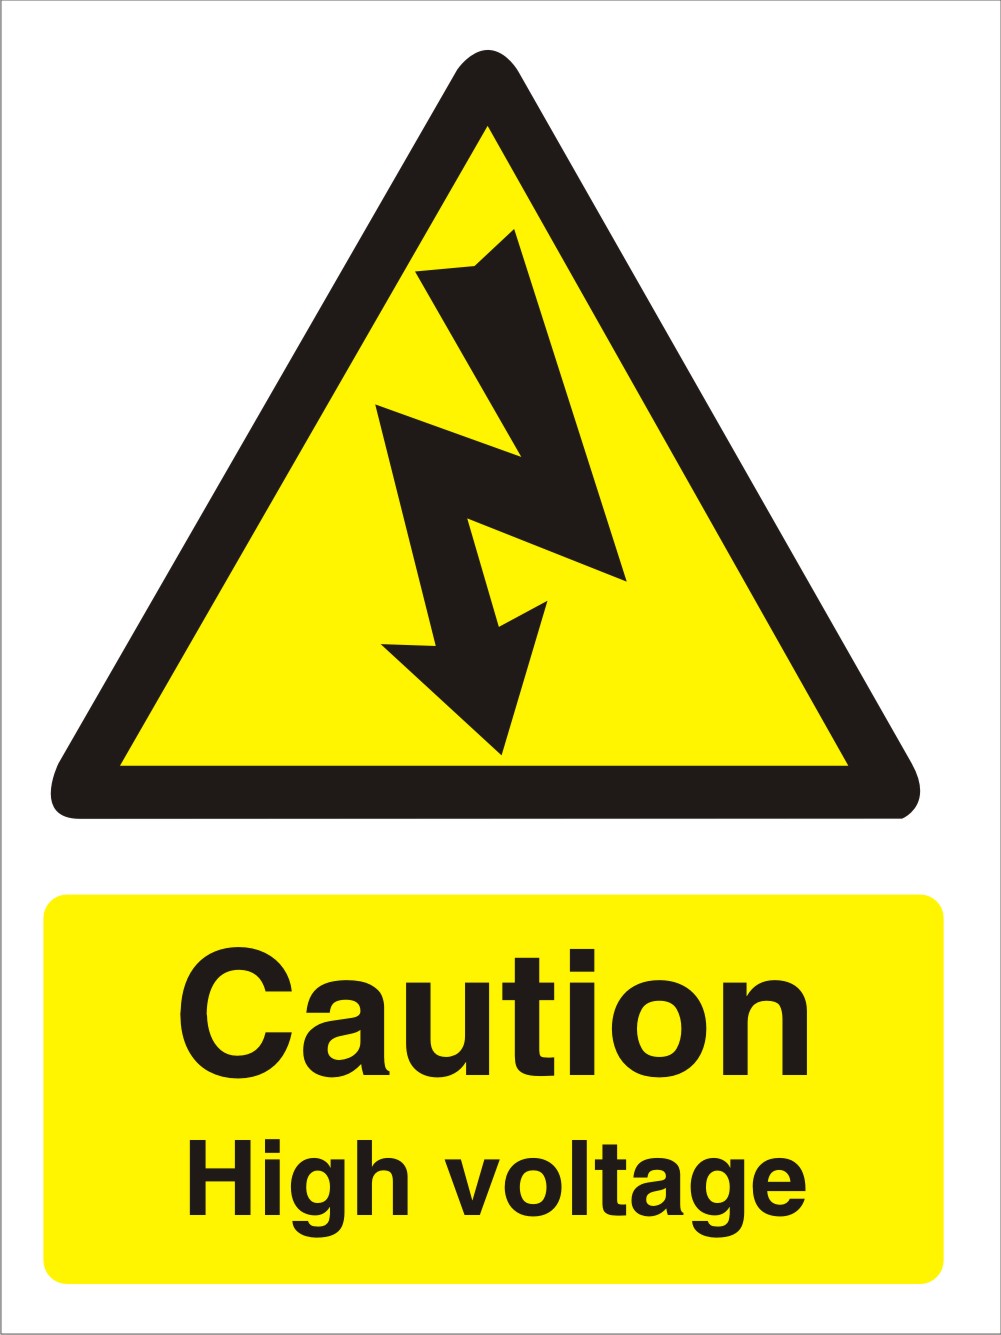 Caution high voltage safety sign - Safety Signs UK